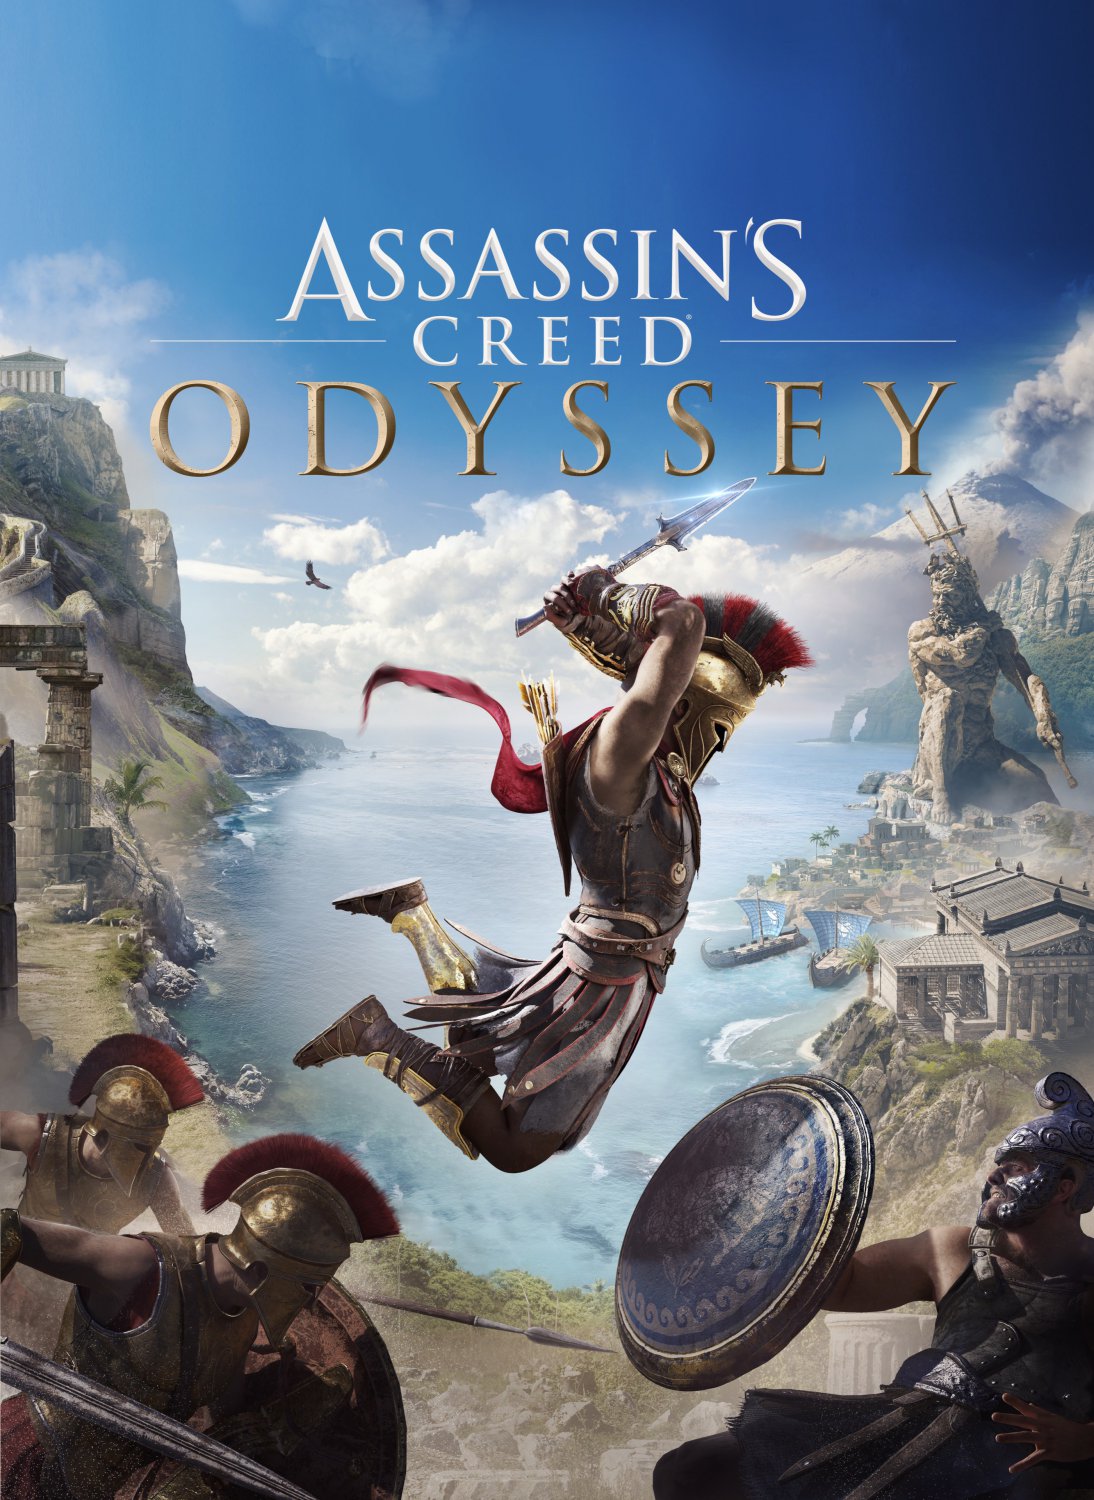 Assassin's Creed Odyssey Ancient Greece 13"x19" (32cm/49cm) Polyester Fabric Poster